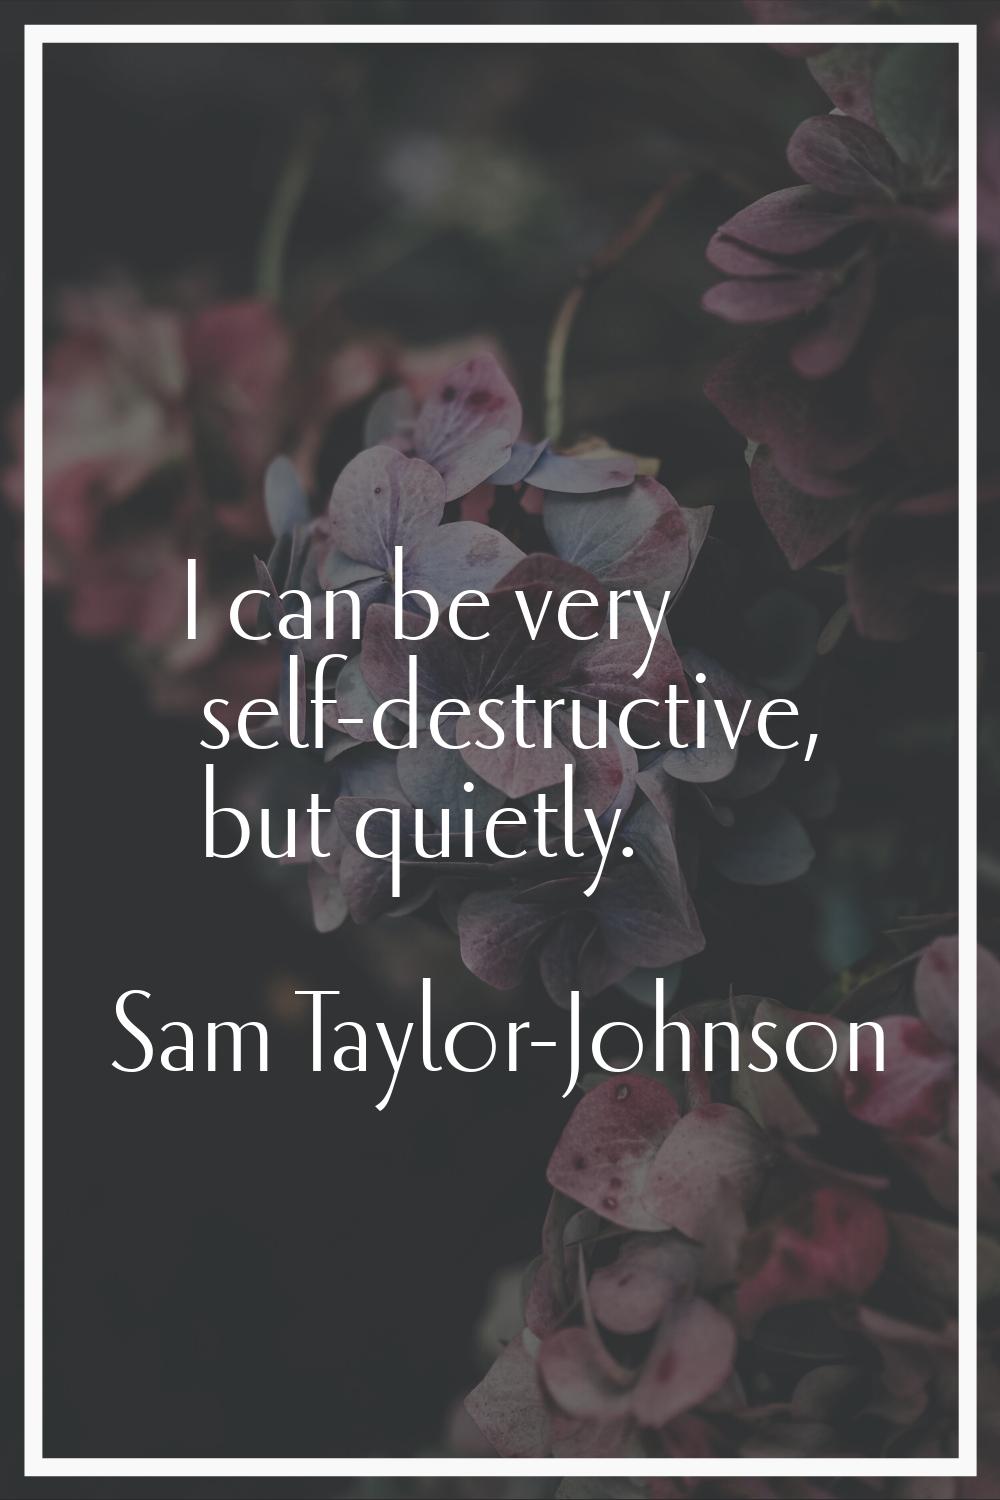 I can be very self-destructive, but quietly.